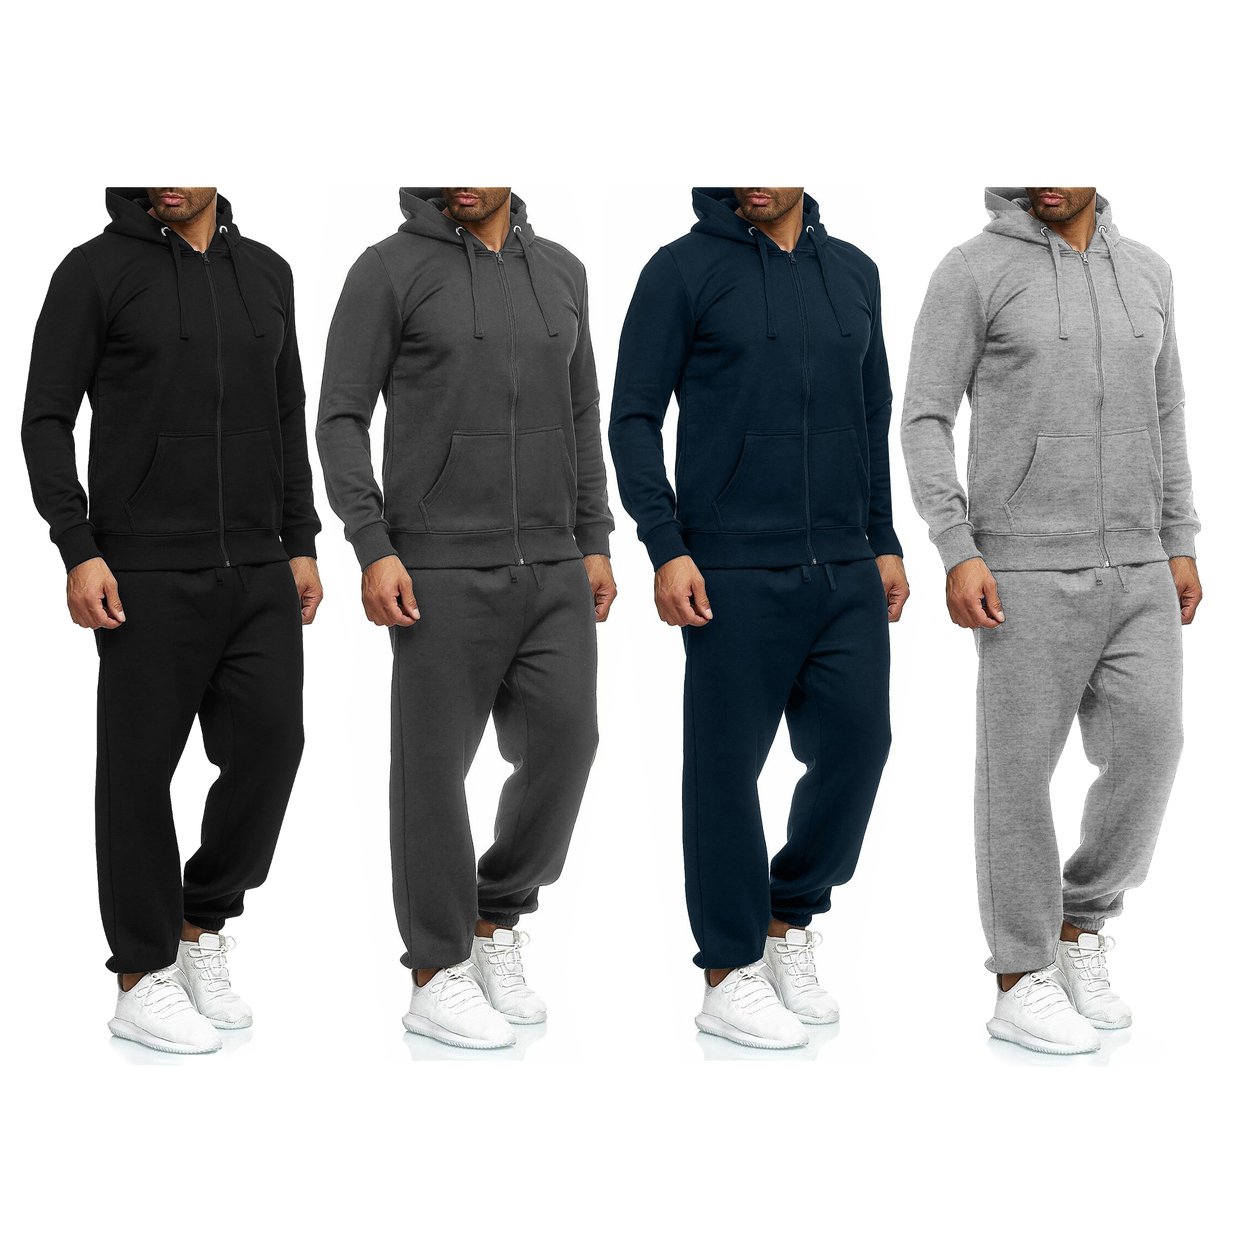 2-Pack: Men's Casual Big & Tall Athletic Active Winter Warm Fleece Lined Full Zip Tracksuit Jogger Set - Grey, 3xl